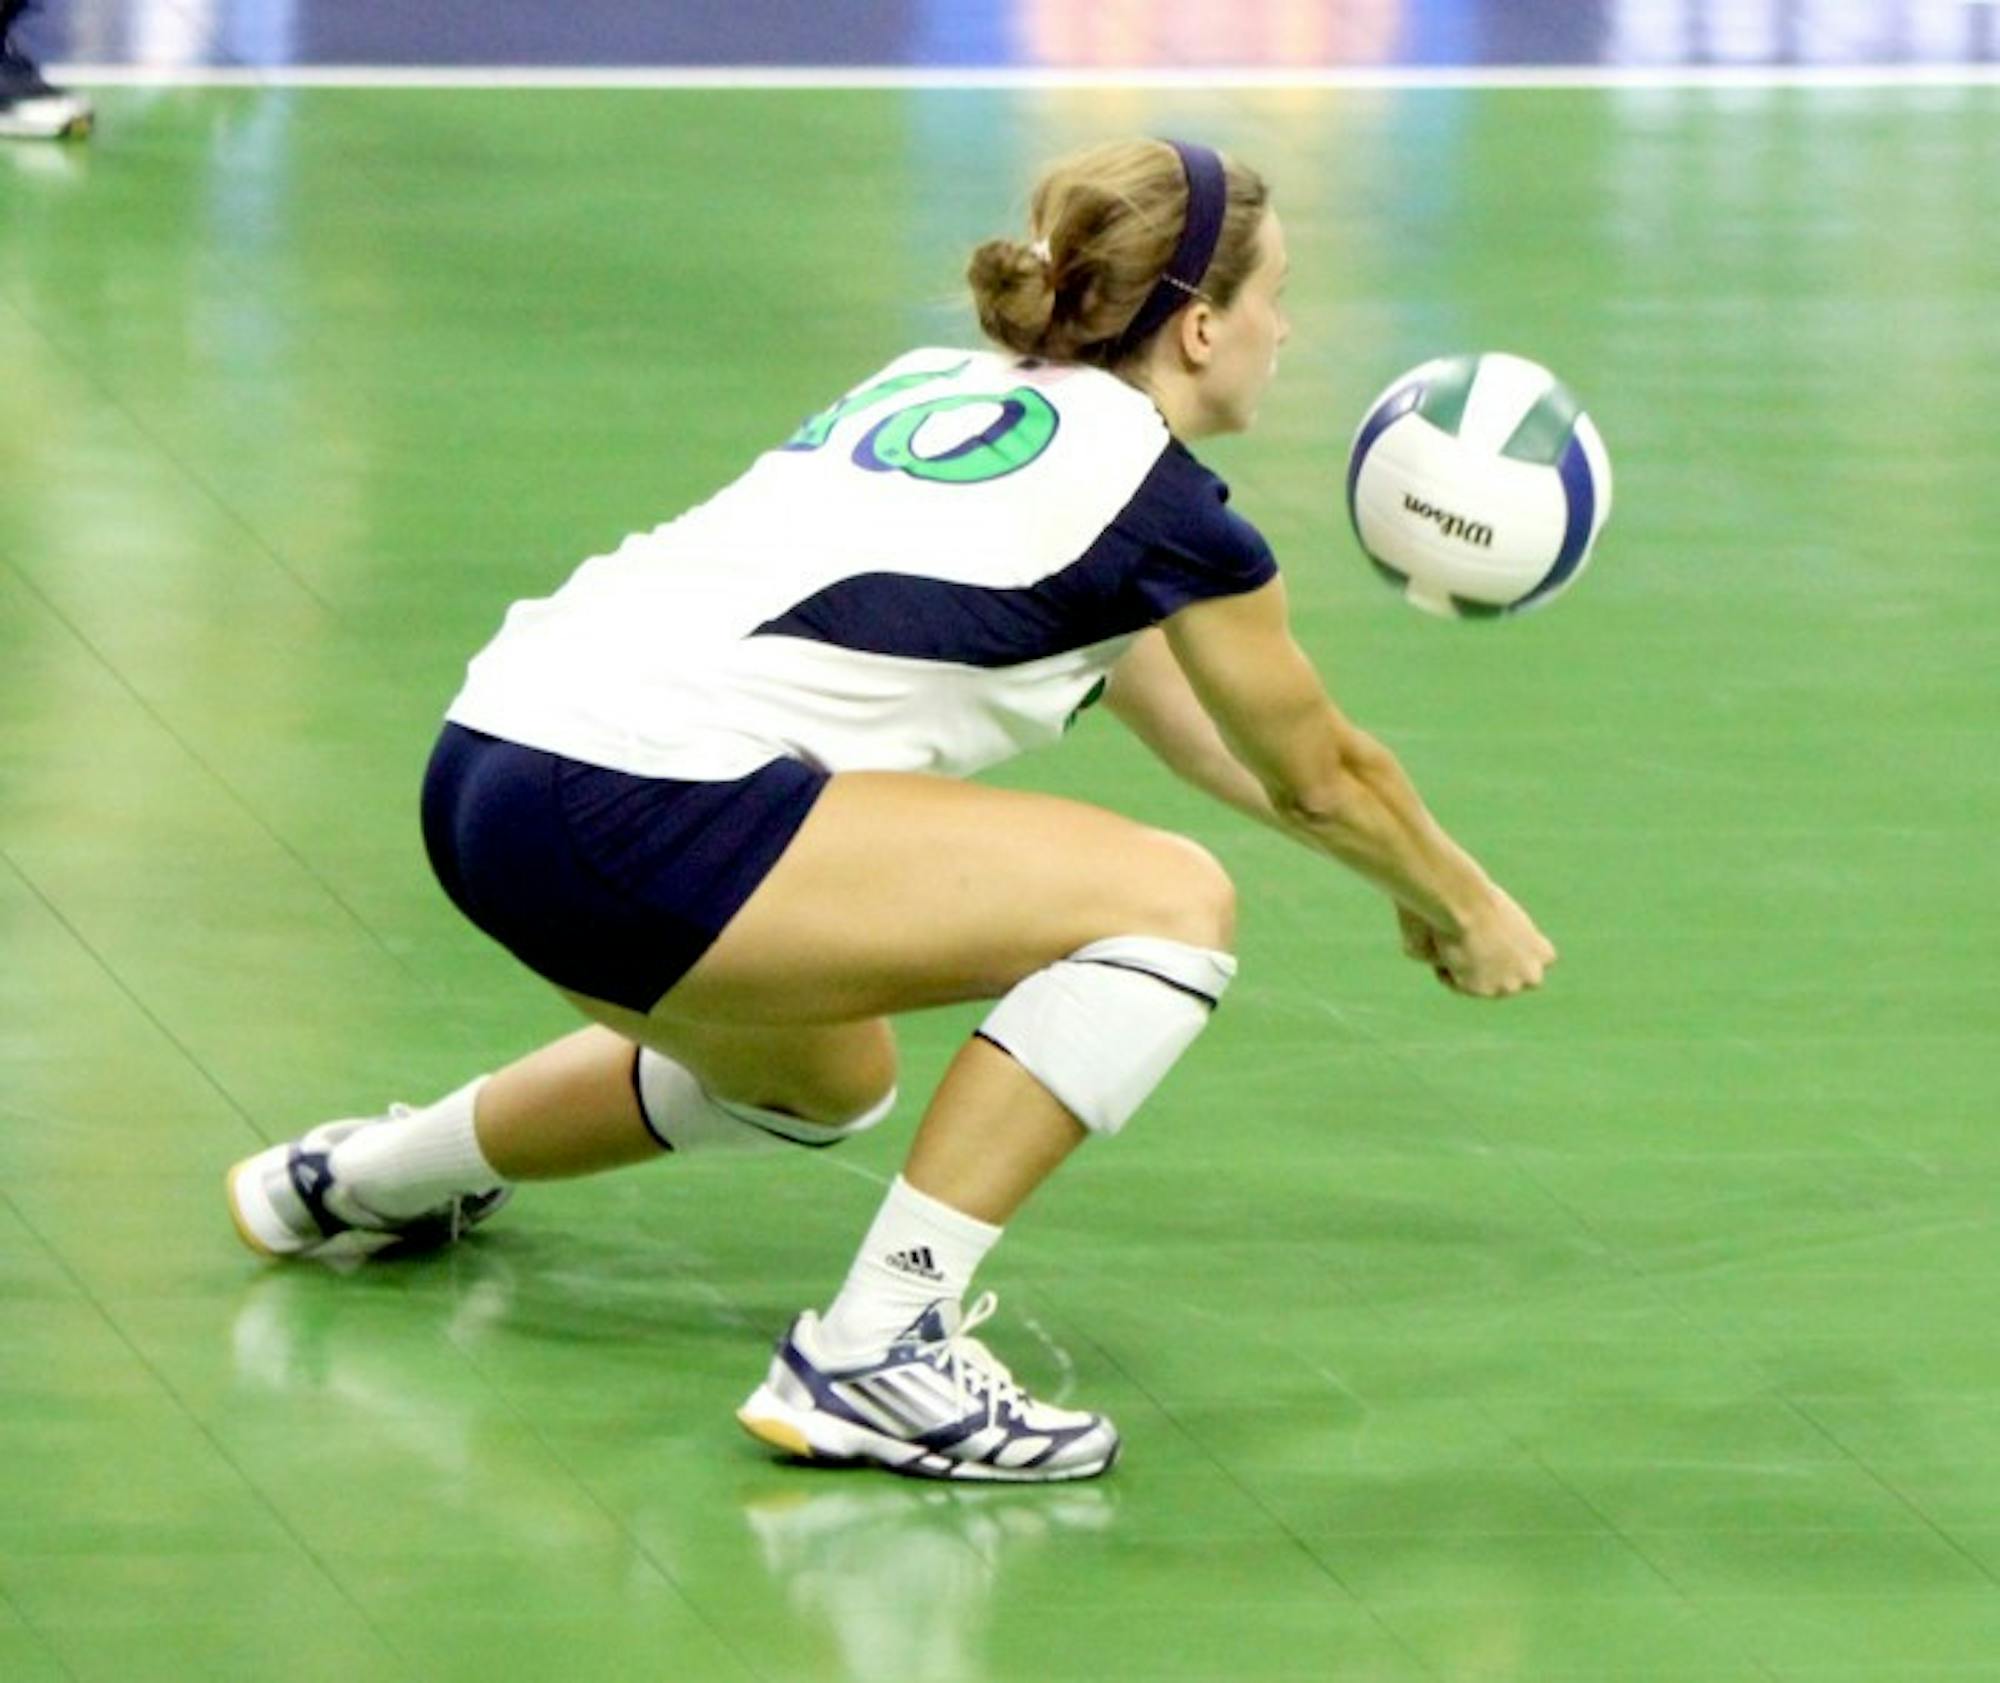 Notre Dame senior libero Kathleen Severyn digs a ball against Polish club team Dabrowa in an exhibition match on Sept. 8, 2013. Severyn and the Irish host the Shamrock Invitational this weekend at the Purcell Pavilion.